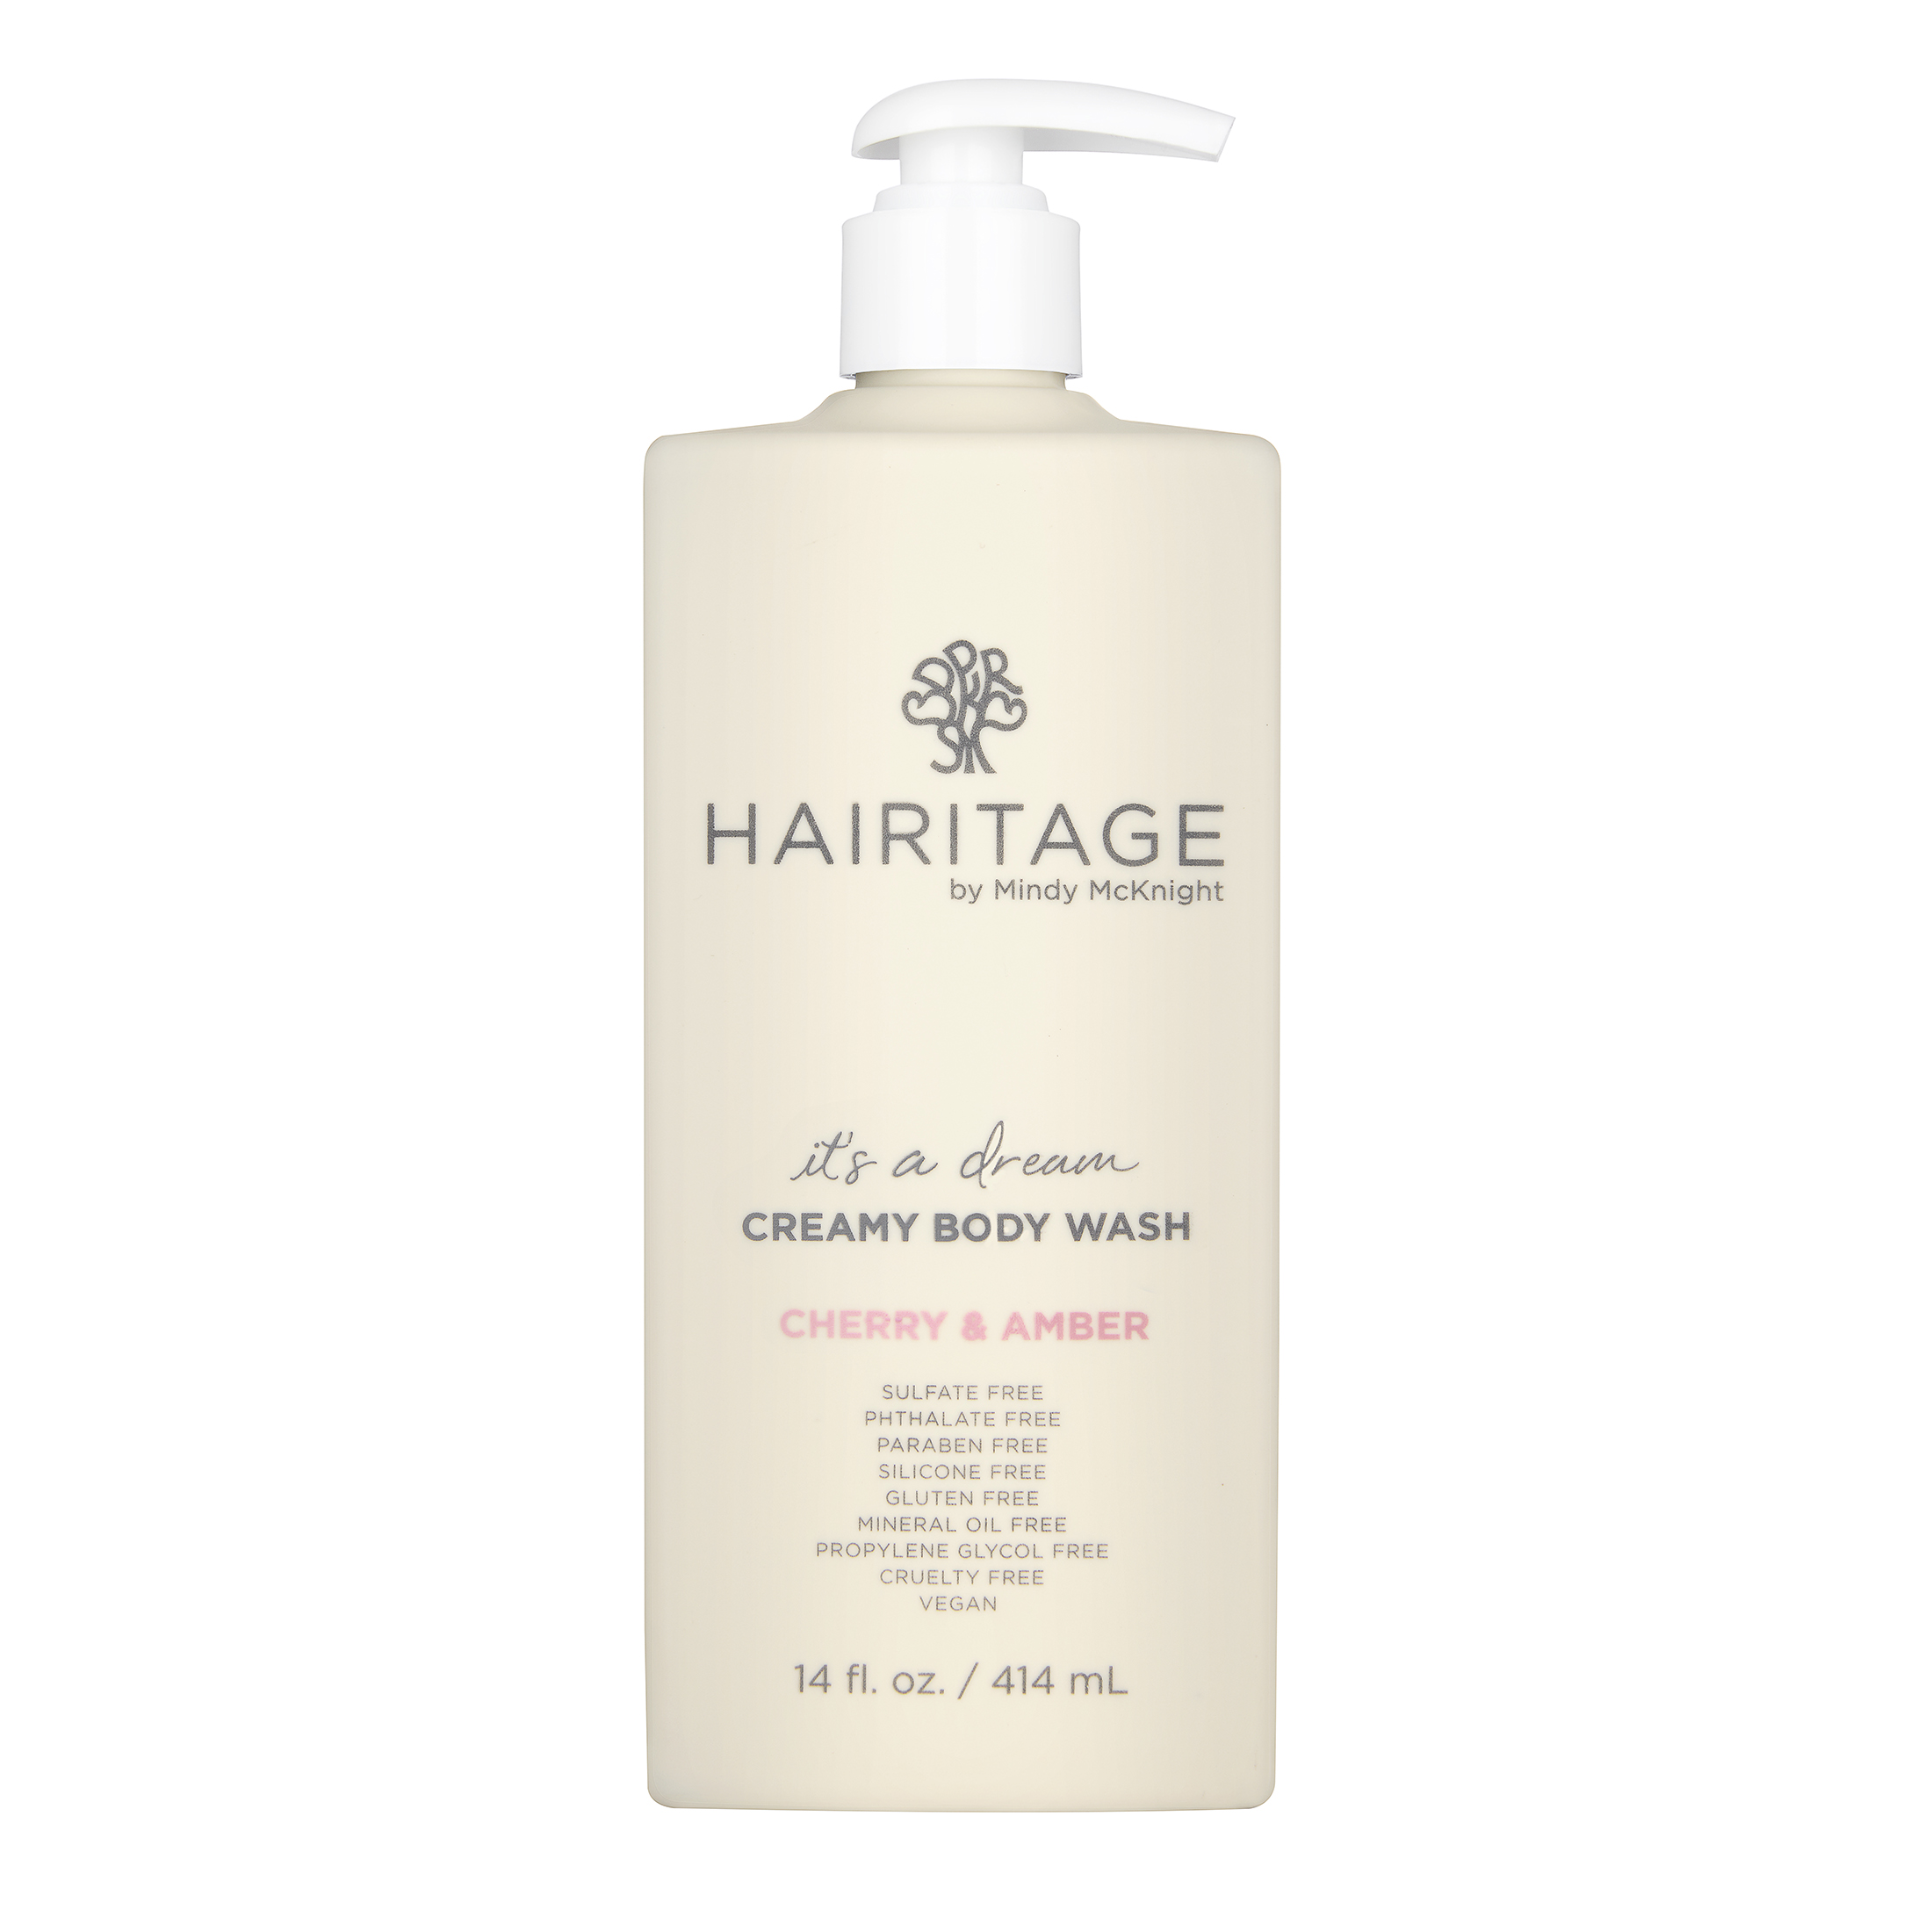 Hairitage It’s A Dream Cherry & Amber Scented Creamy Body Wash for Women, Men & Kids | Açaí Fruit Extract for All Skin Types | Vetiver & Guaiac Wood Essential Oils, 14 fl oz. - image 1 of 8